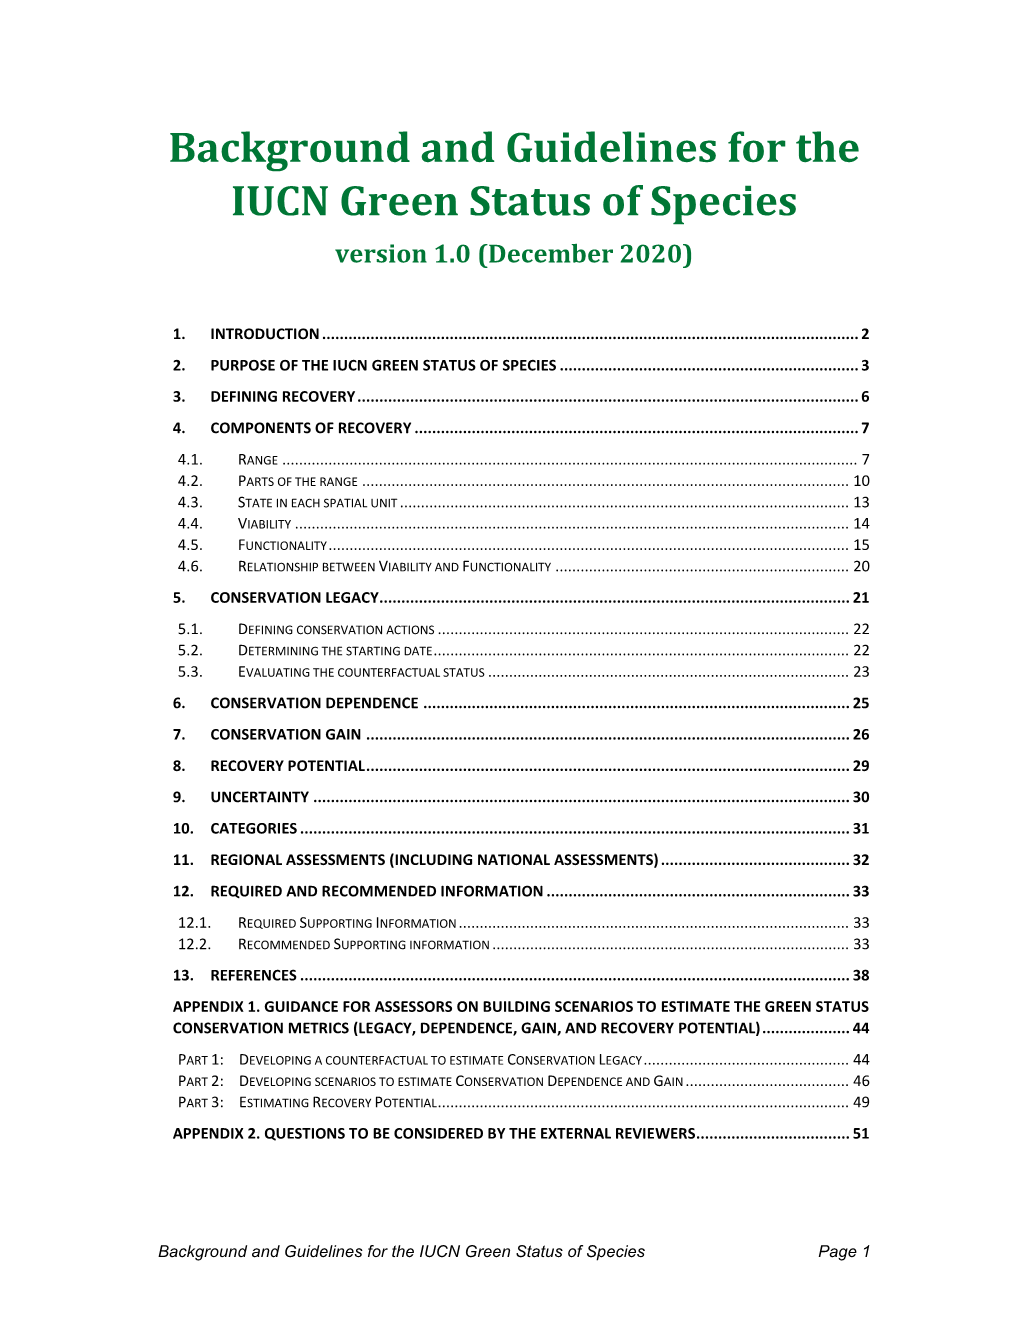 Background and Guidelines for the IUCN Green Status of Species Version 1.0 (December 2020)